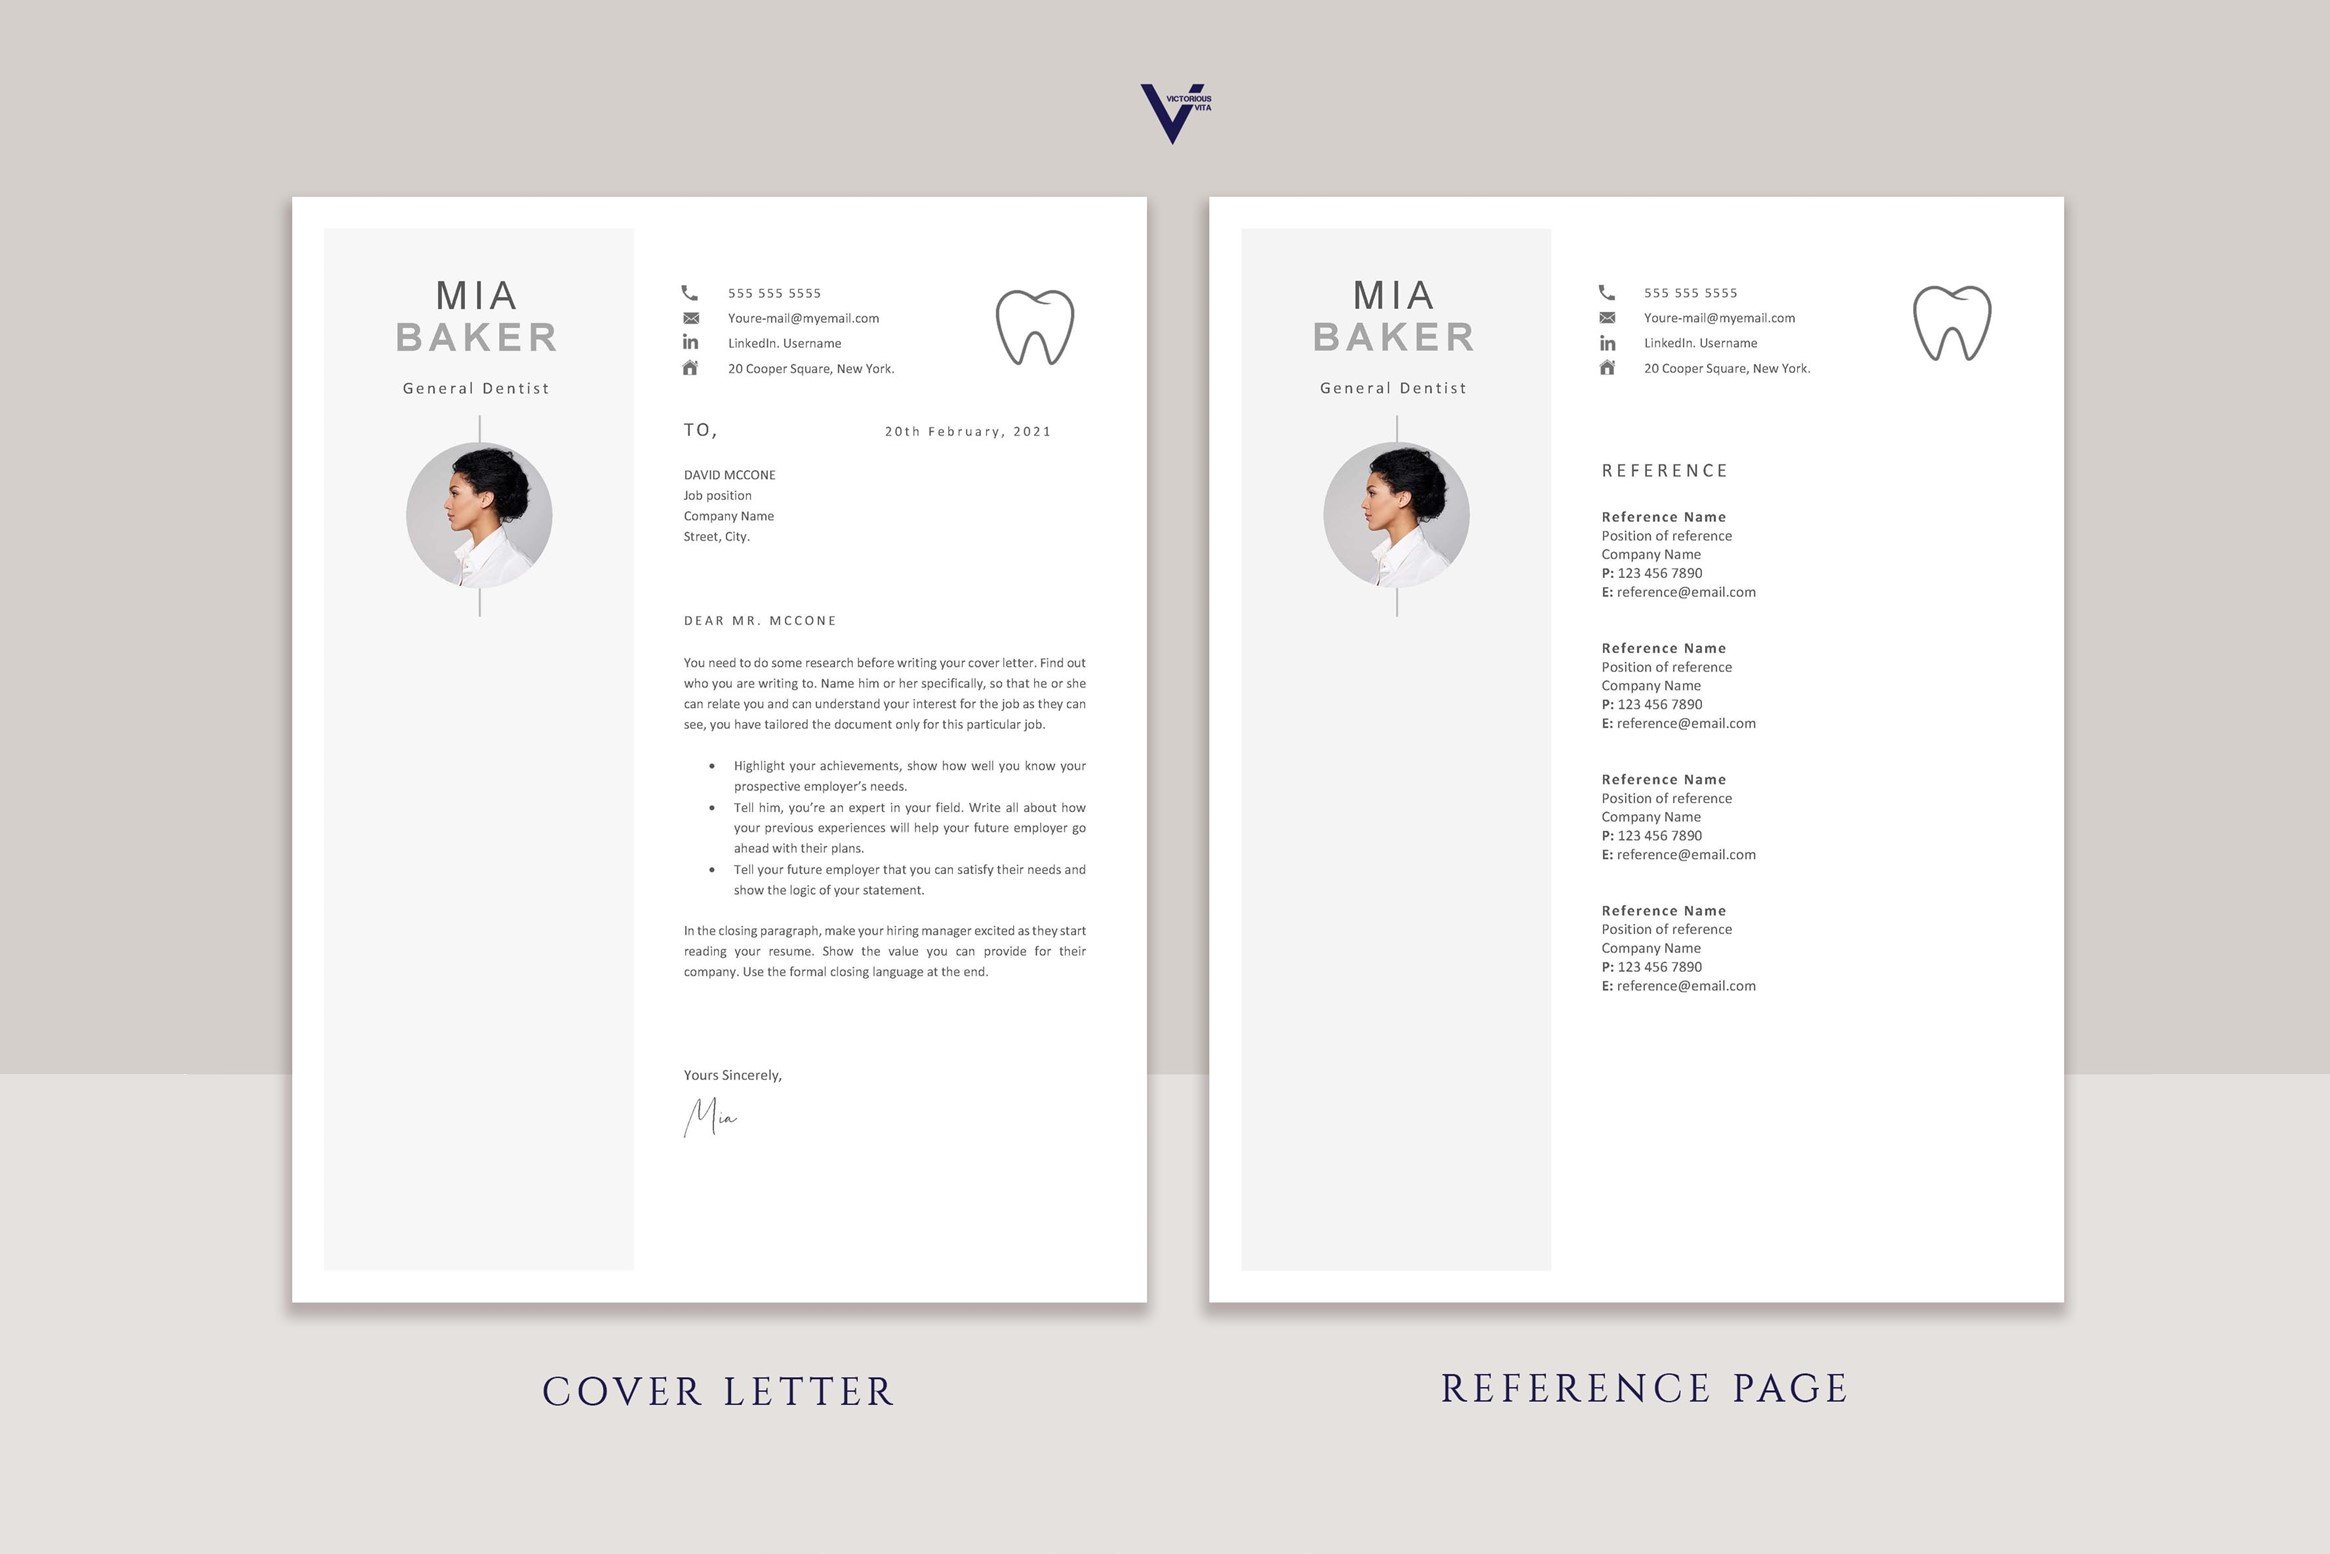 Two resume templates with the same cover letter.